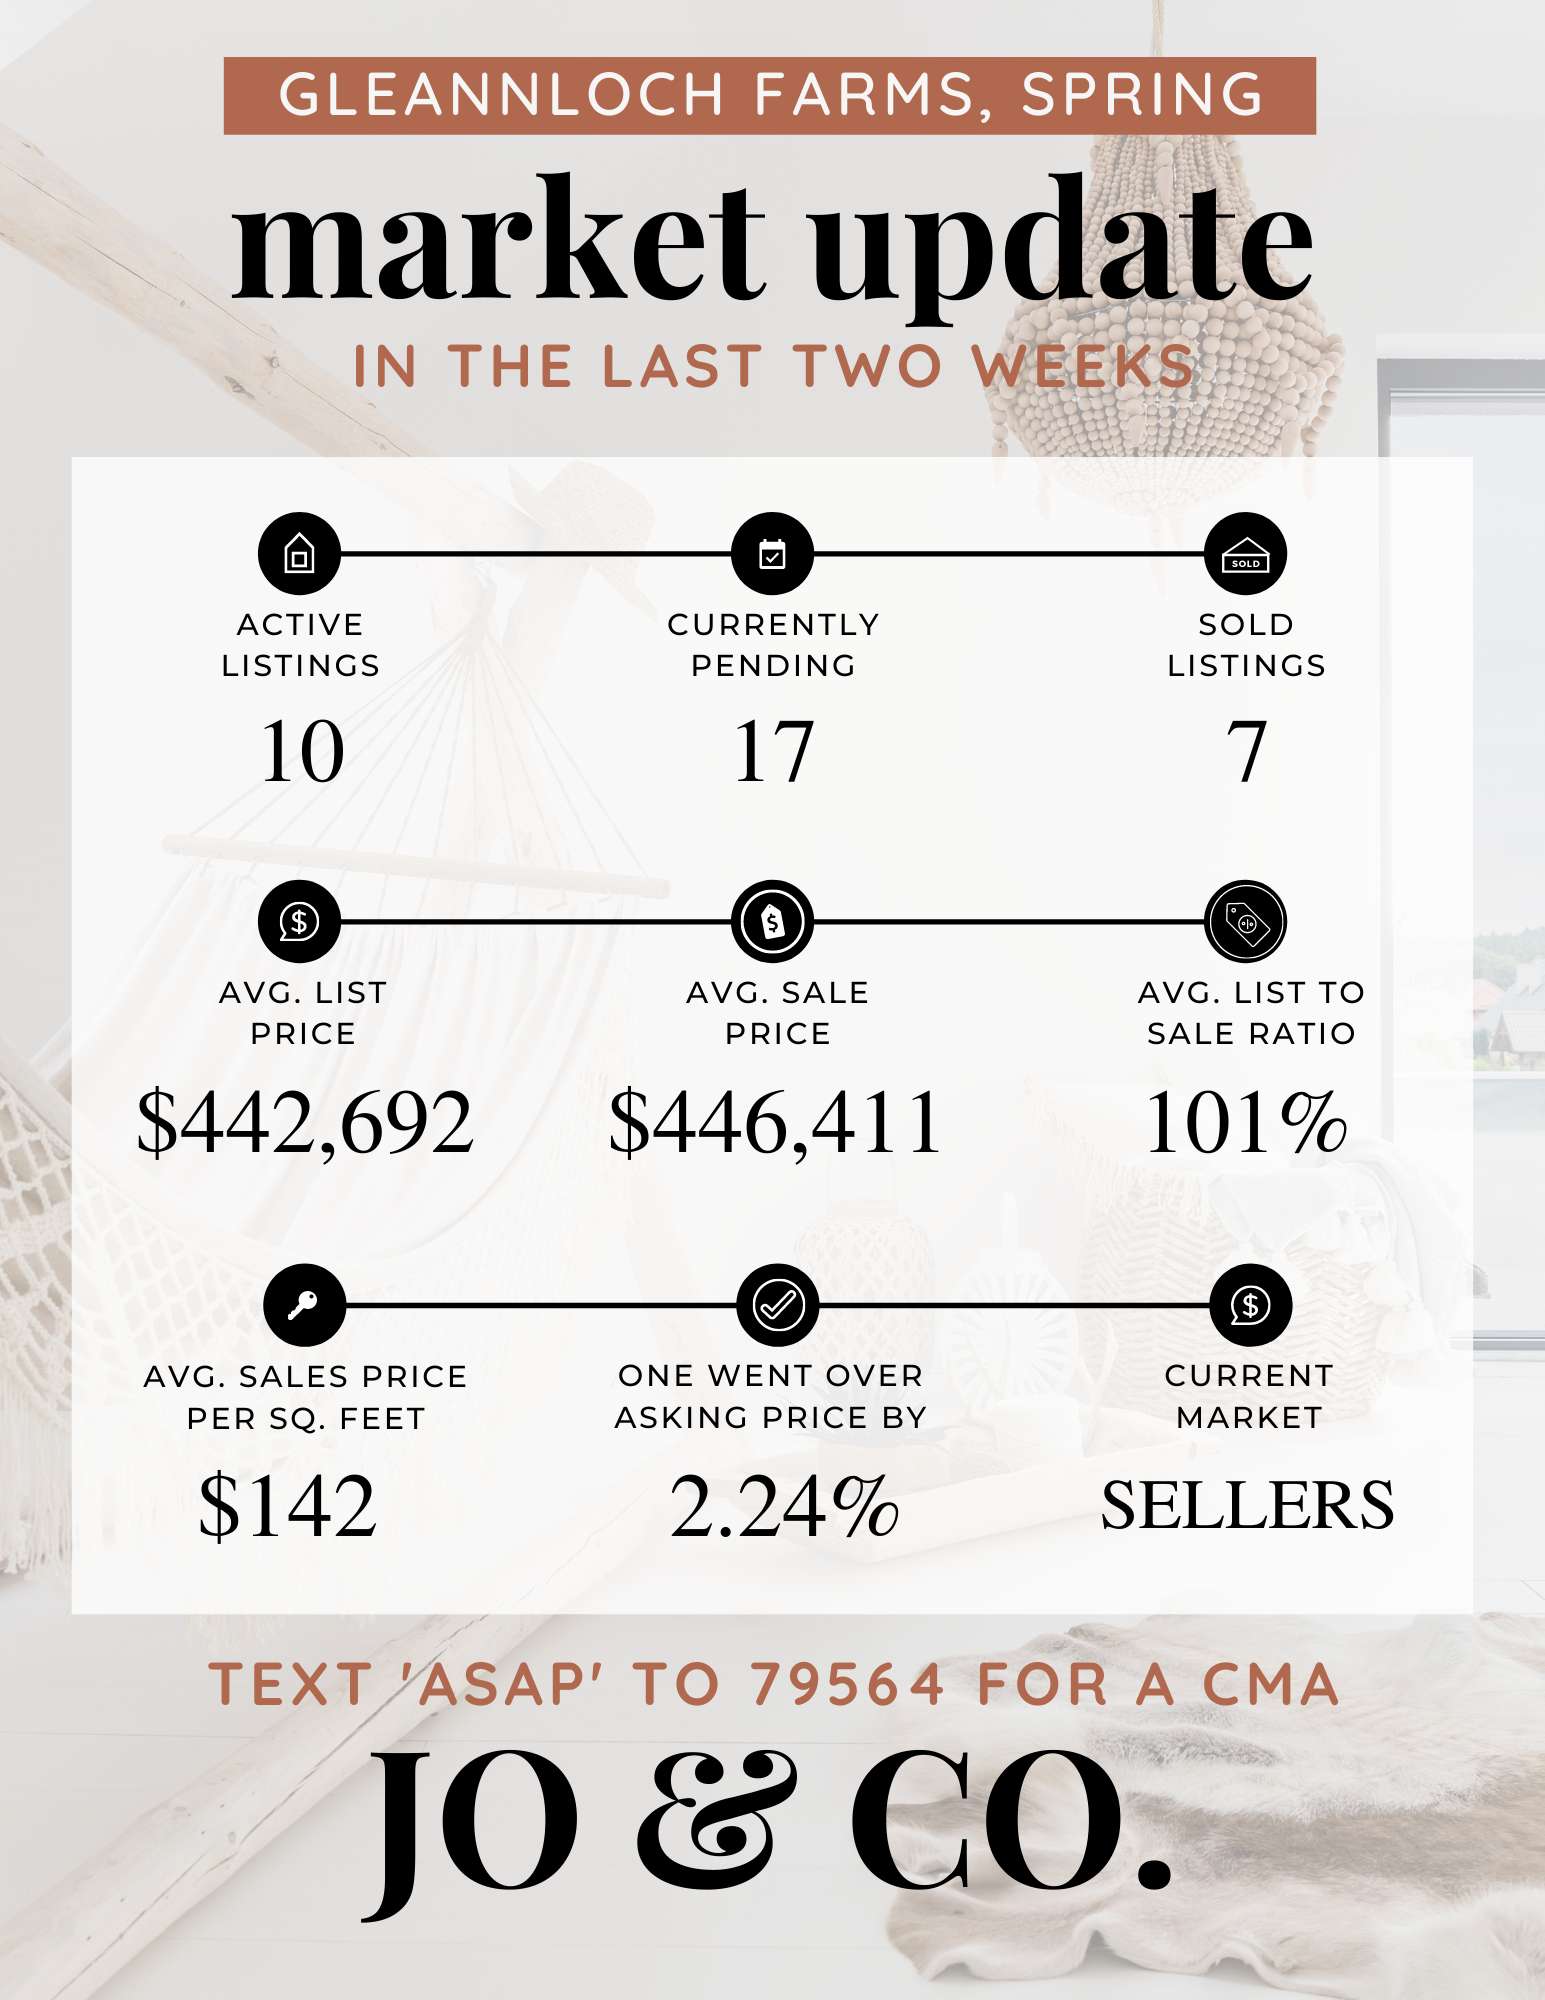 gleannloch farms springs texas market update for april 12 2022